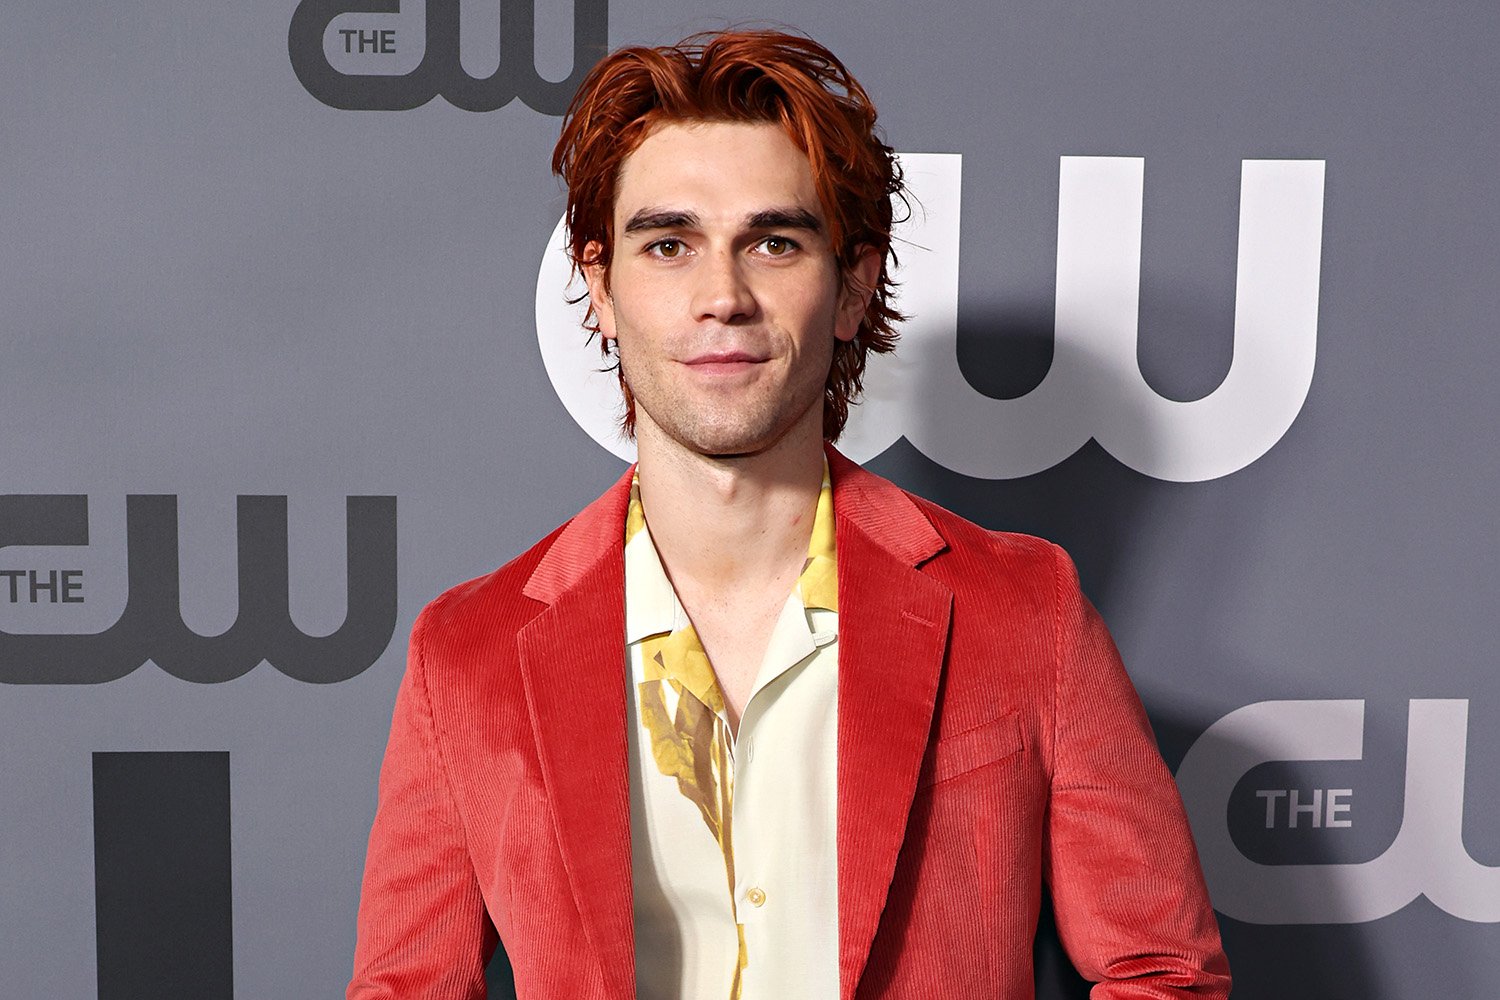 KJ Apa at the CW Upfront 2022, where he spoke about Riverdale being canceled after season 7.